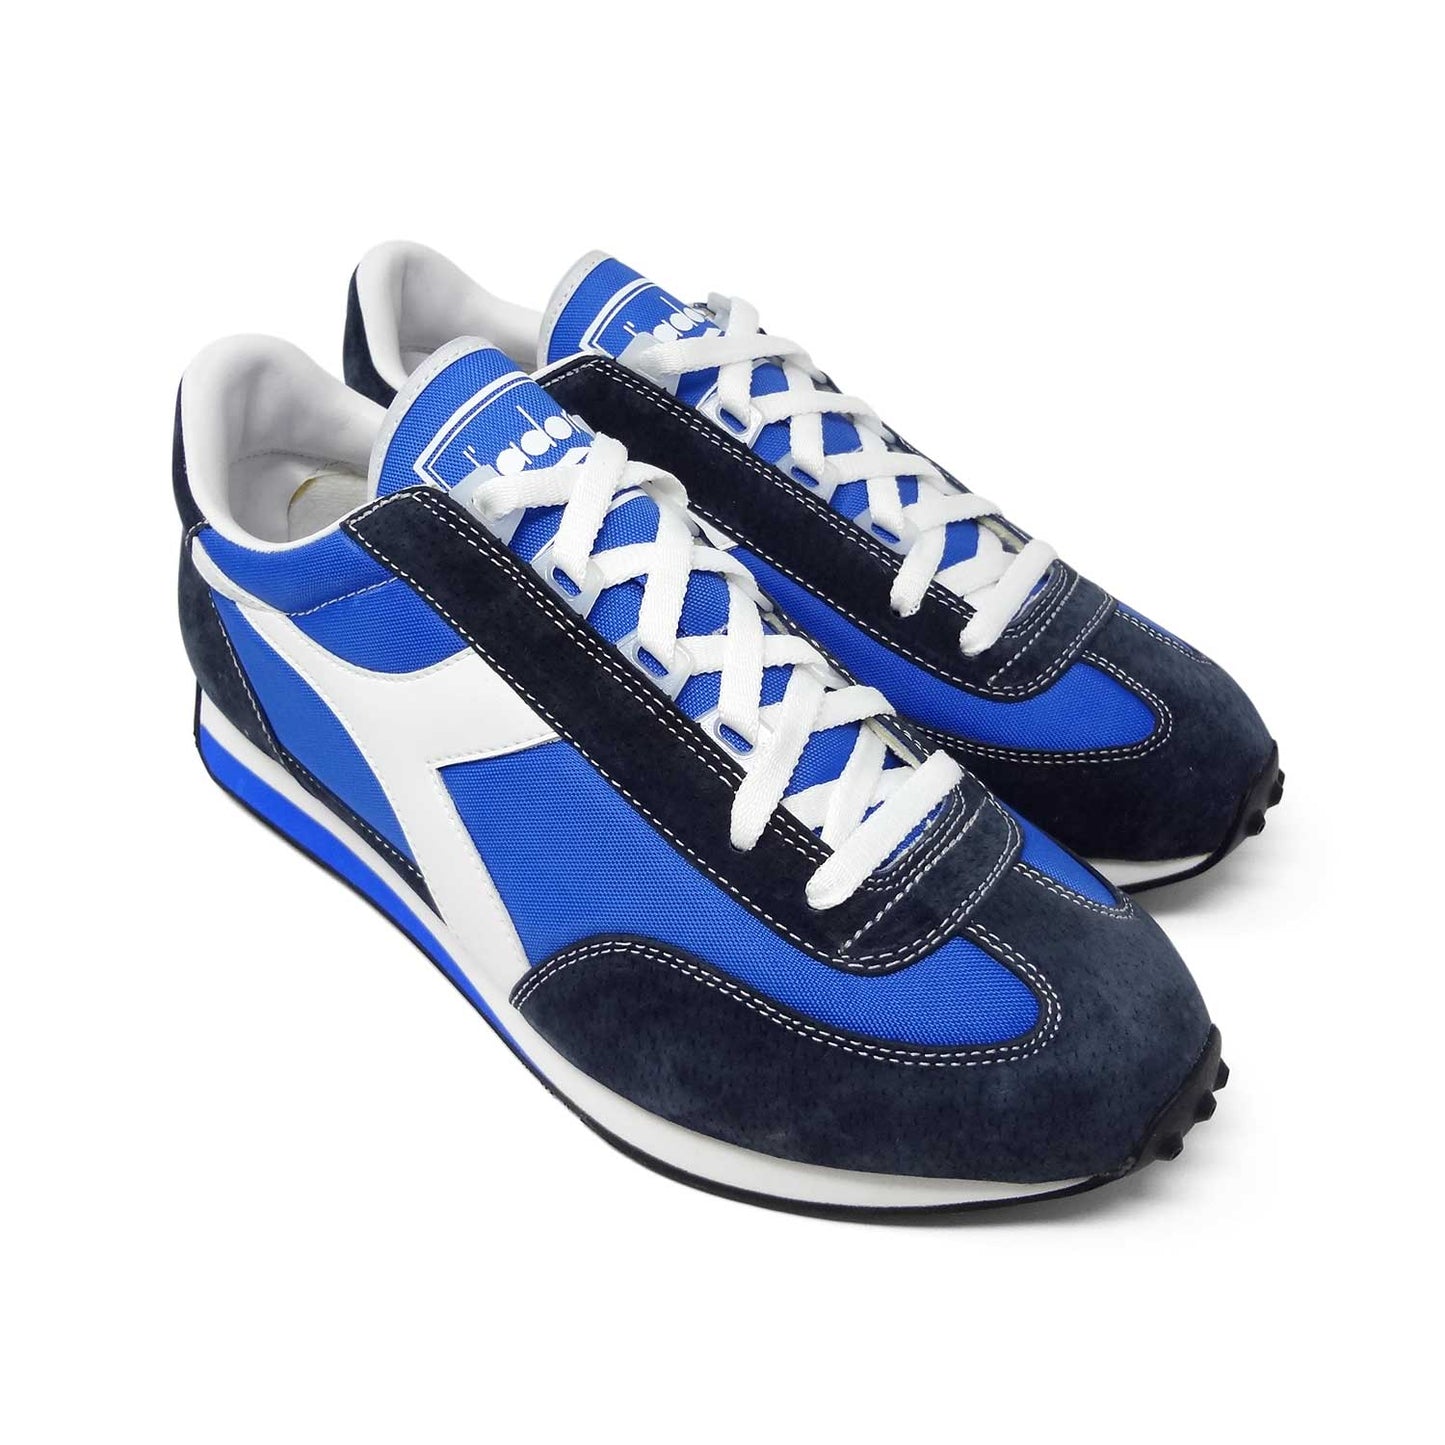 Diadora Rally 1970s Style Retro Men's Sneakers Old School Running Shoes Blue White